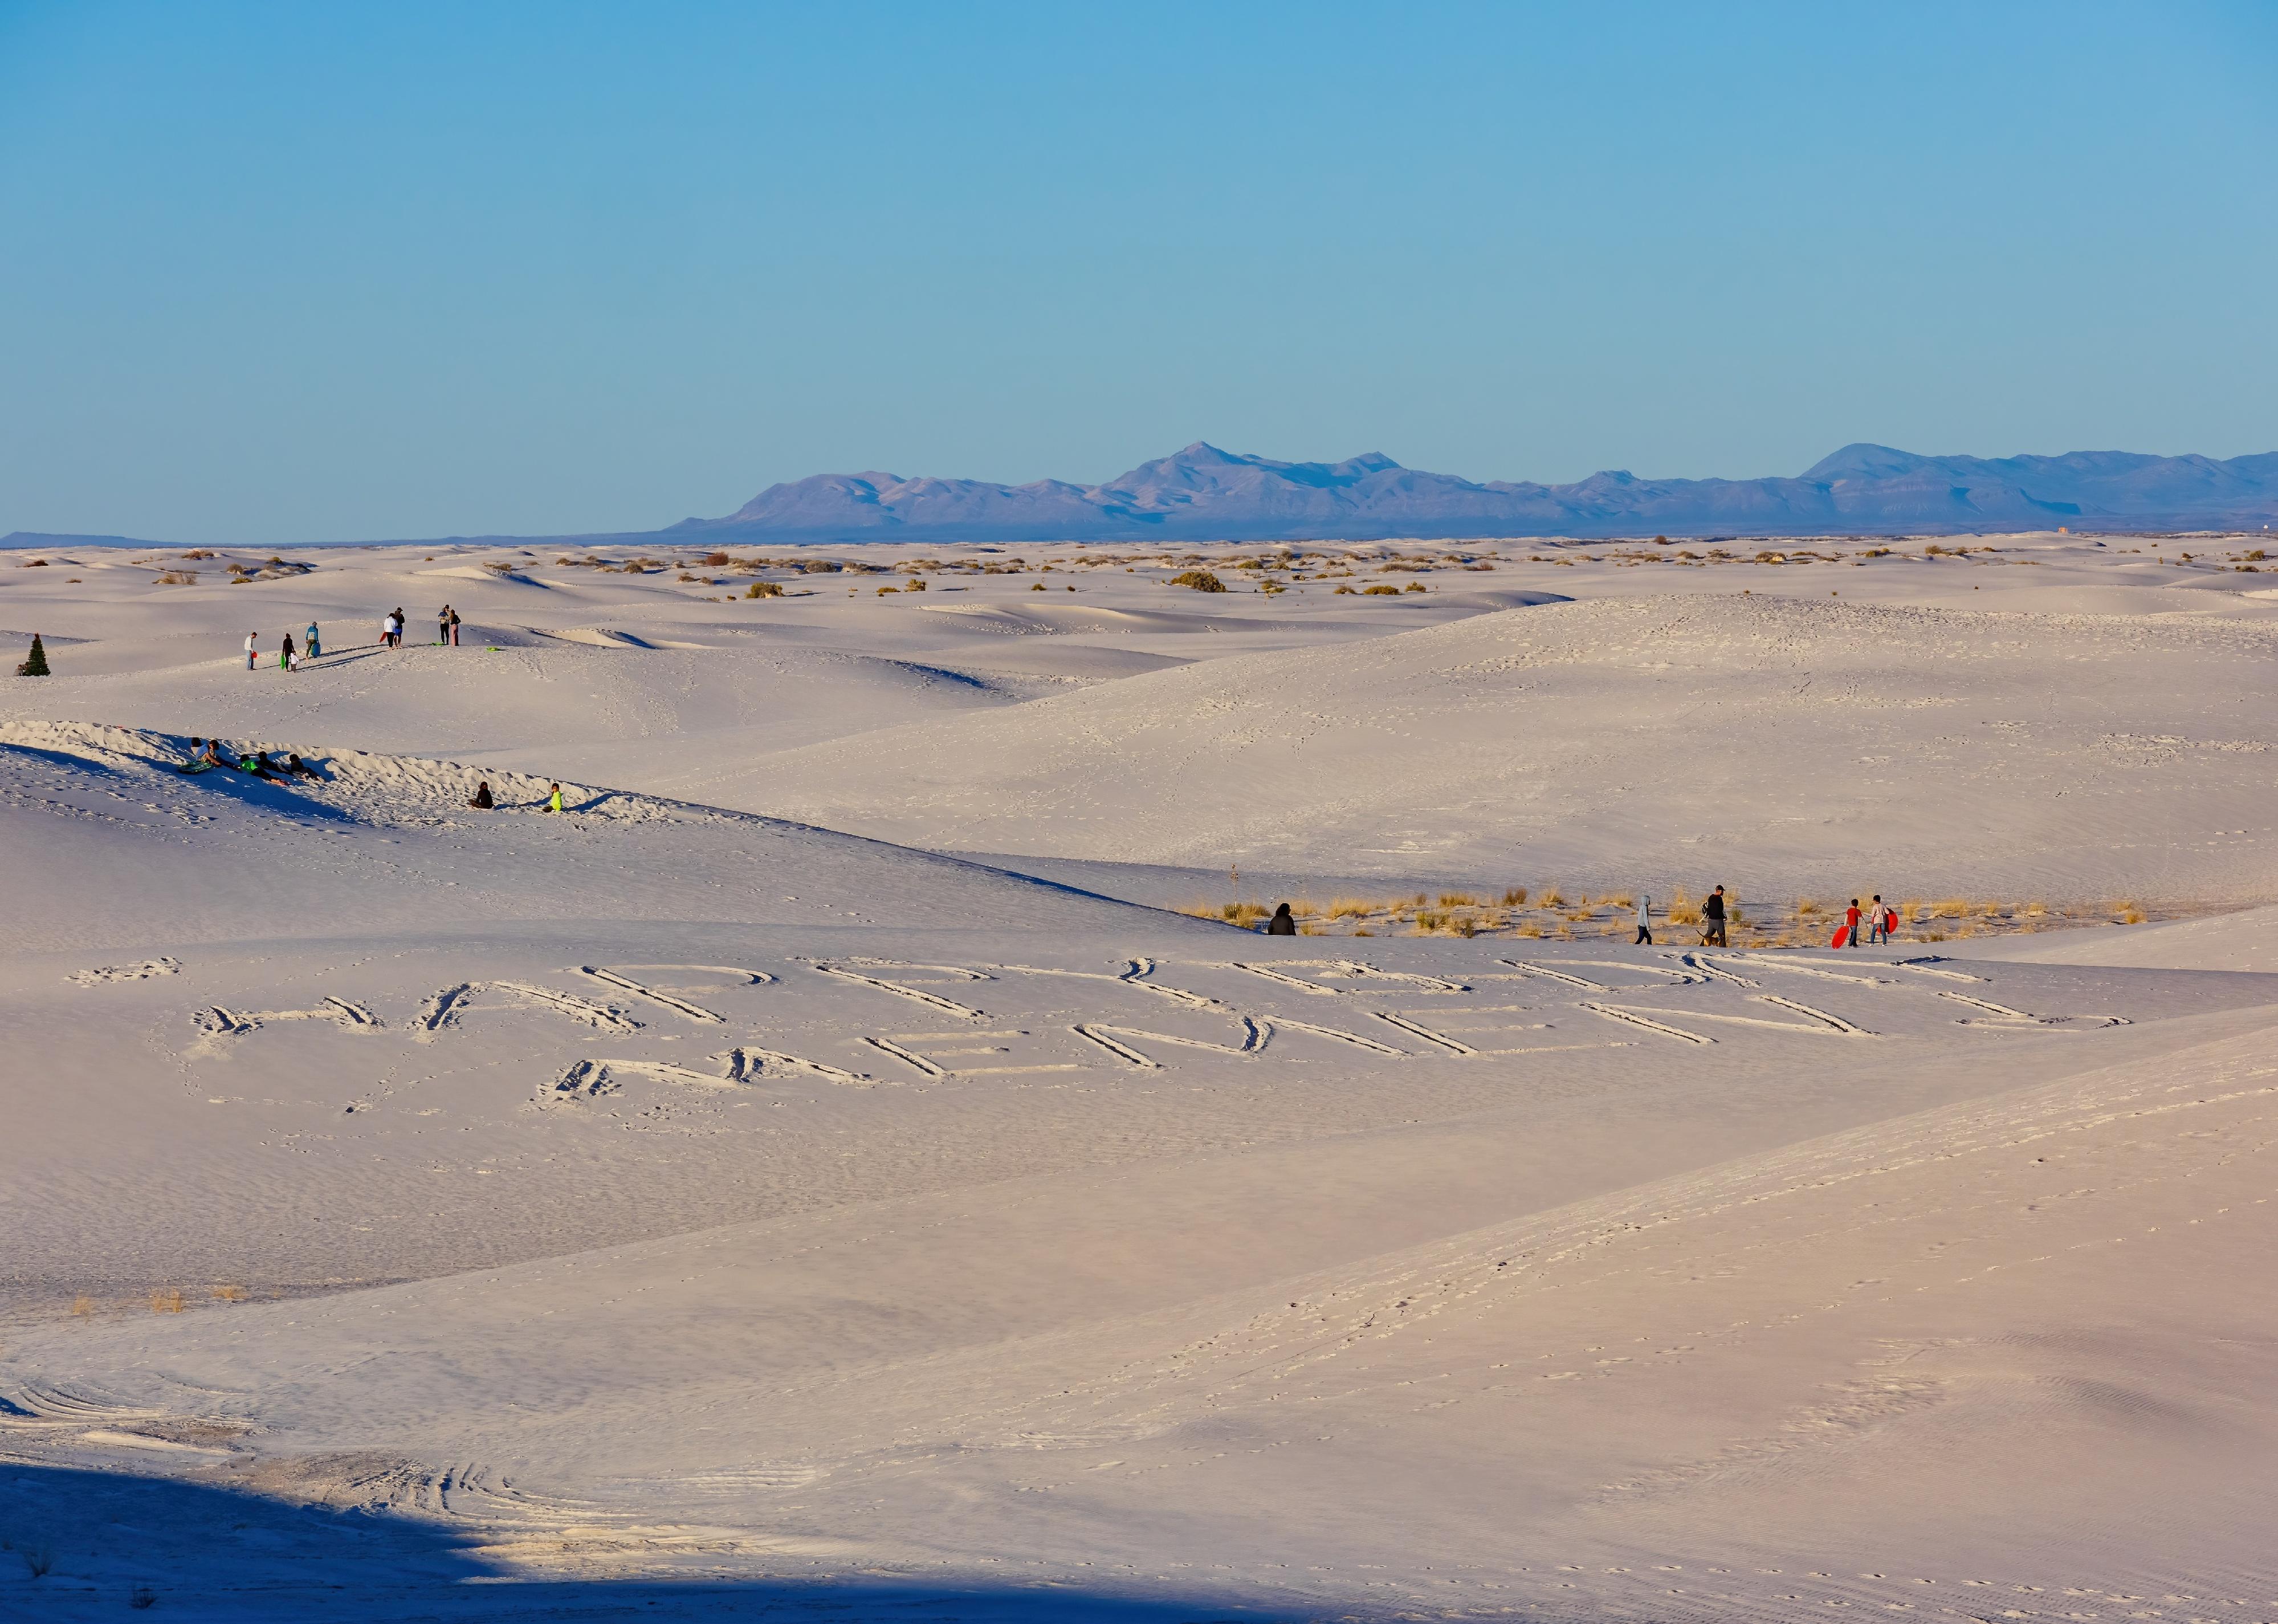 Sunny view of the landscape of White Sands National Park at New Mexico.